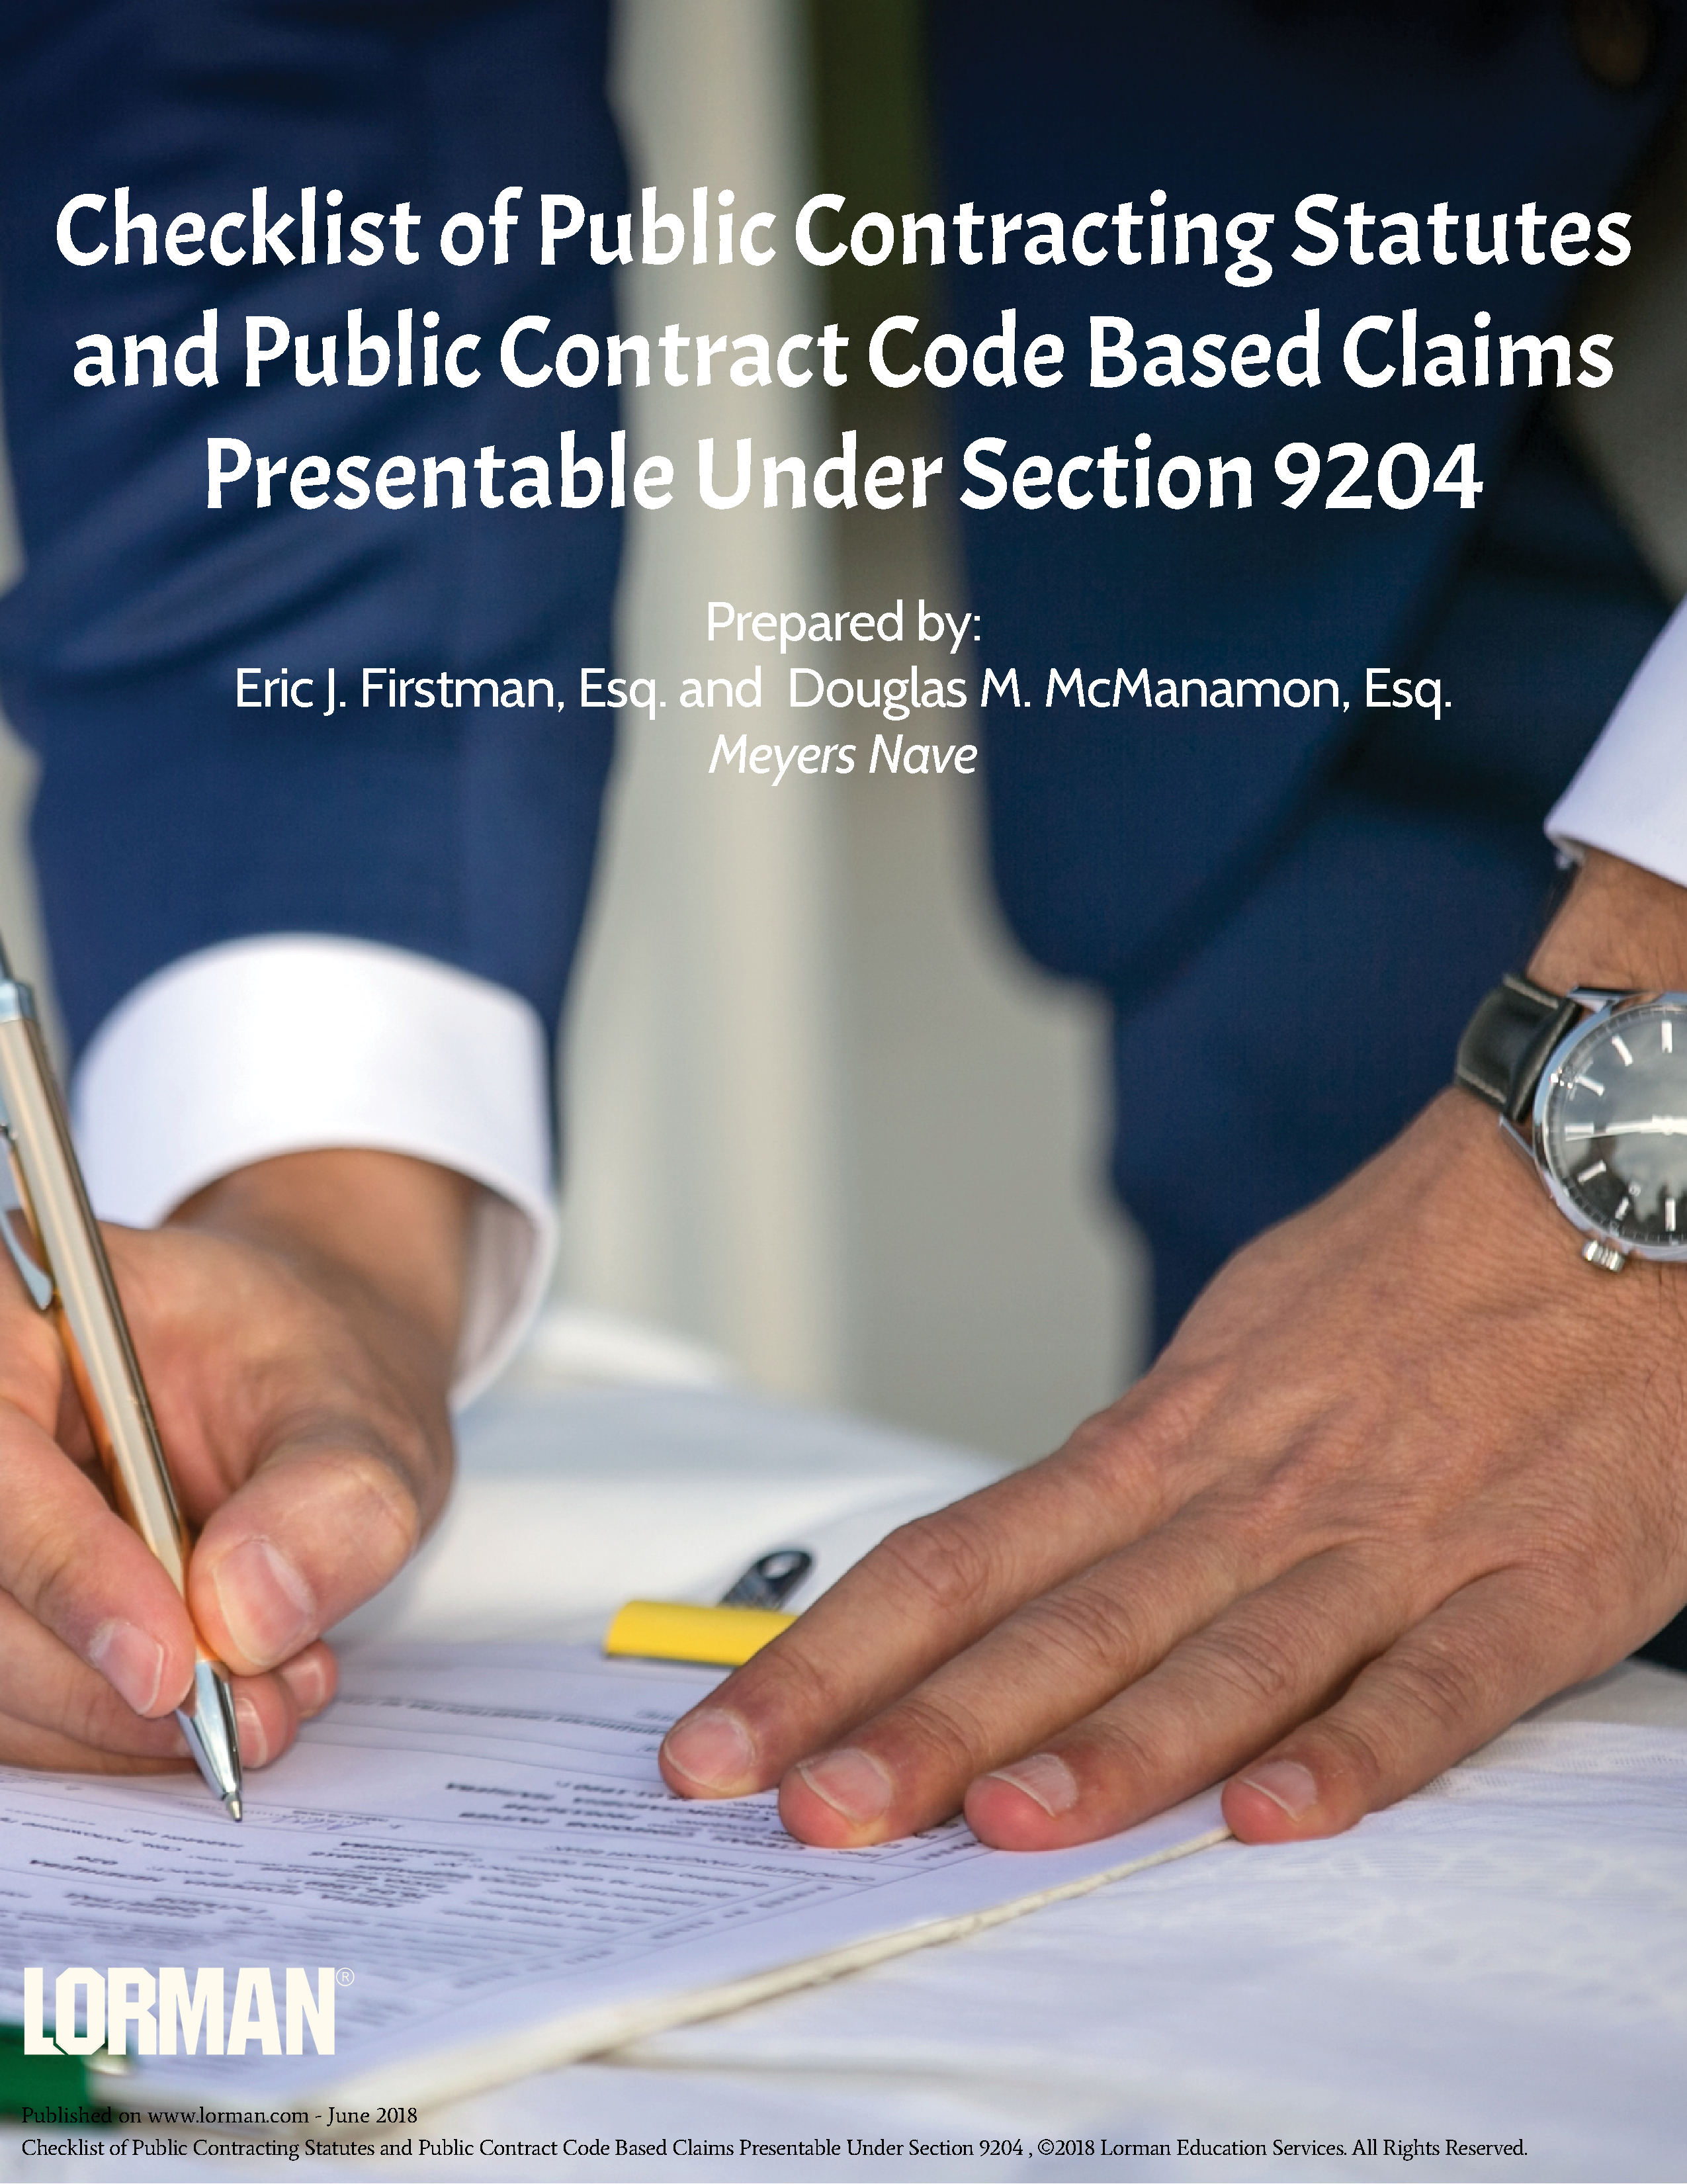 Public Contracting Statutes and Contract Code Based Claims Presentable Under Section 9204